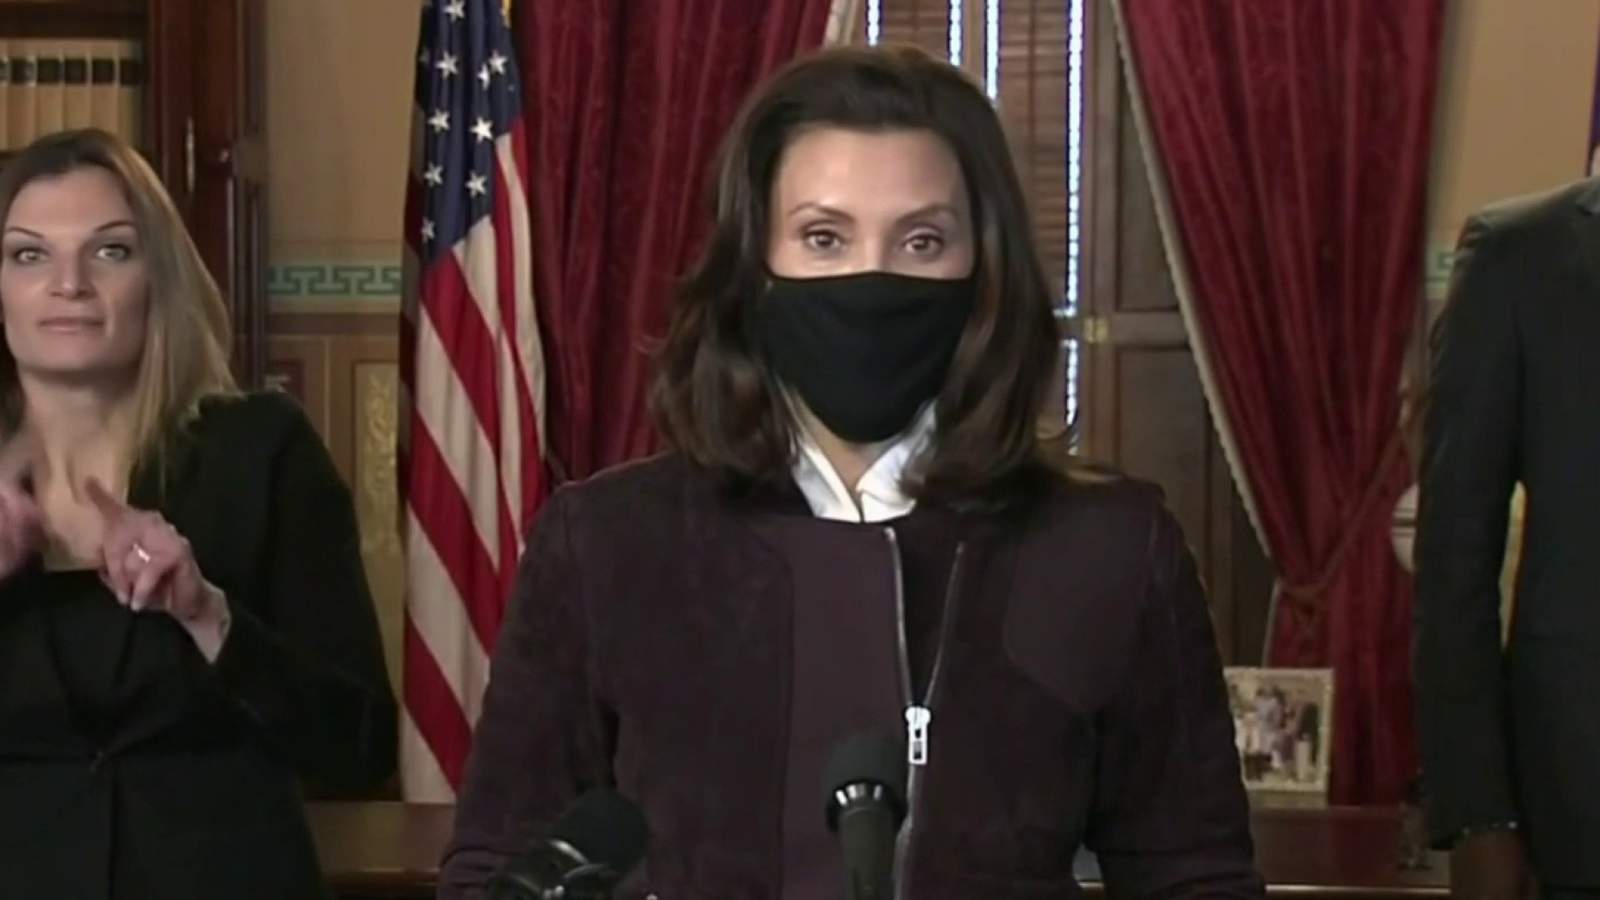 LIVE STREAM: Michigan Gov. Whitmer holds COVID briefing as restrictions set to expire